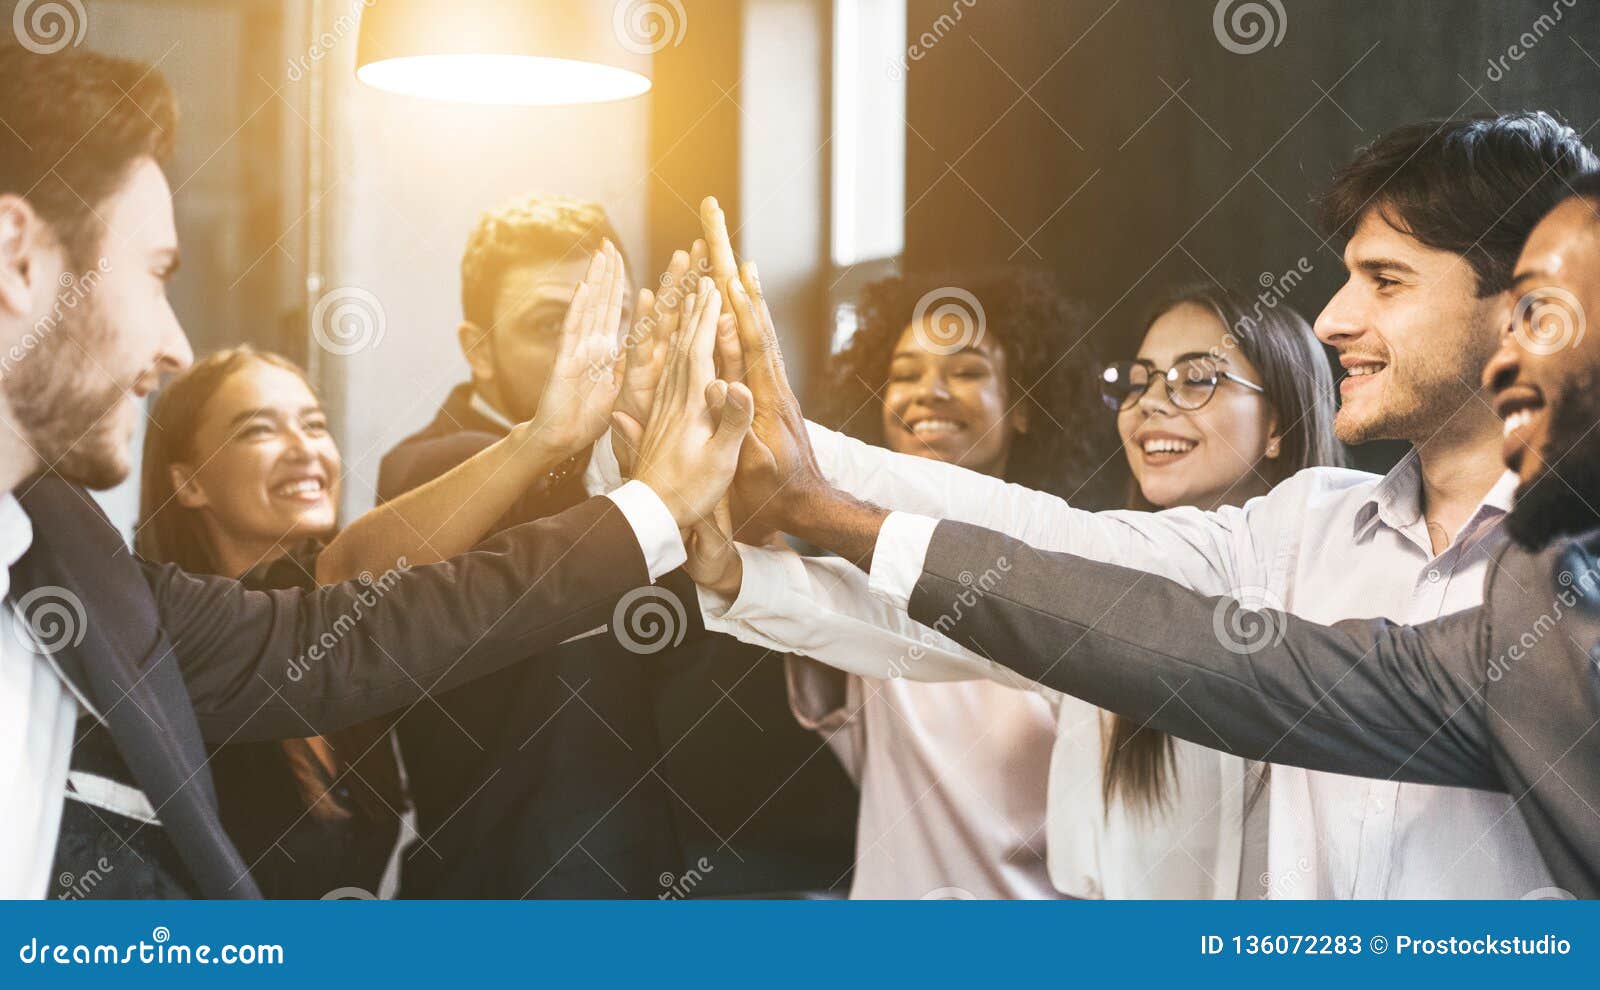 high-five for success. diverse group of business colleagues in office